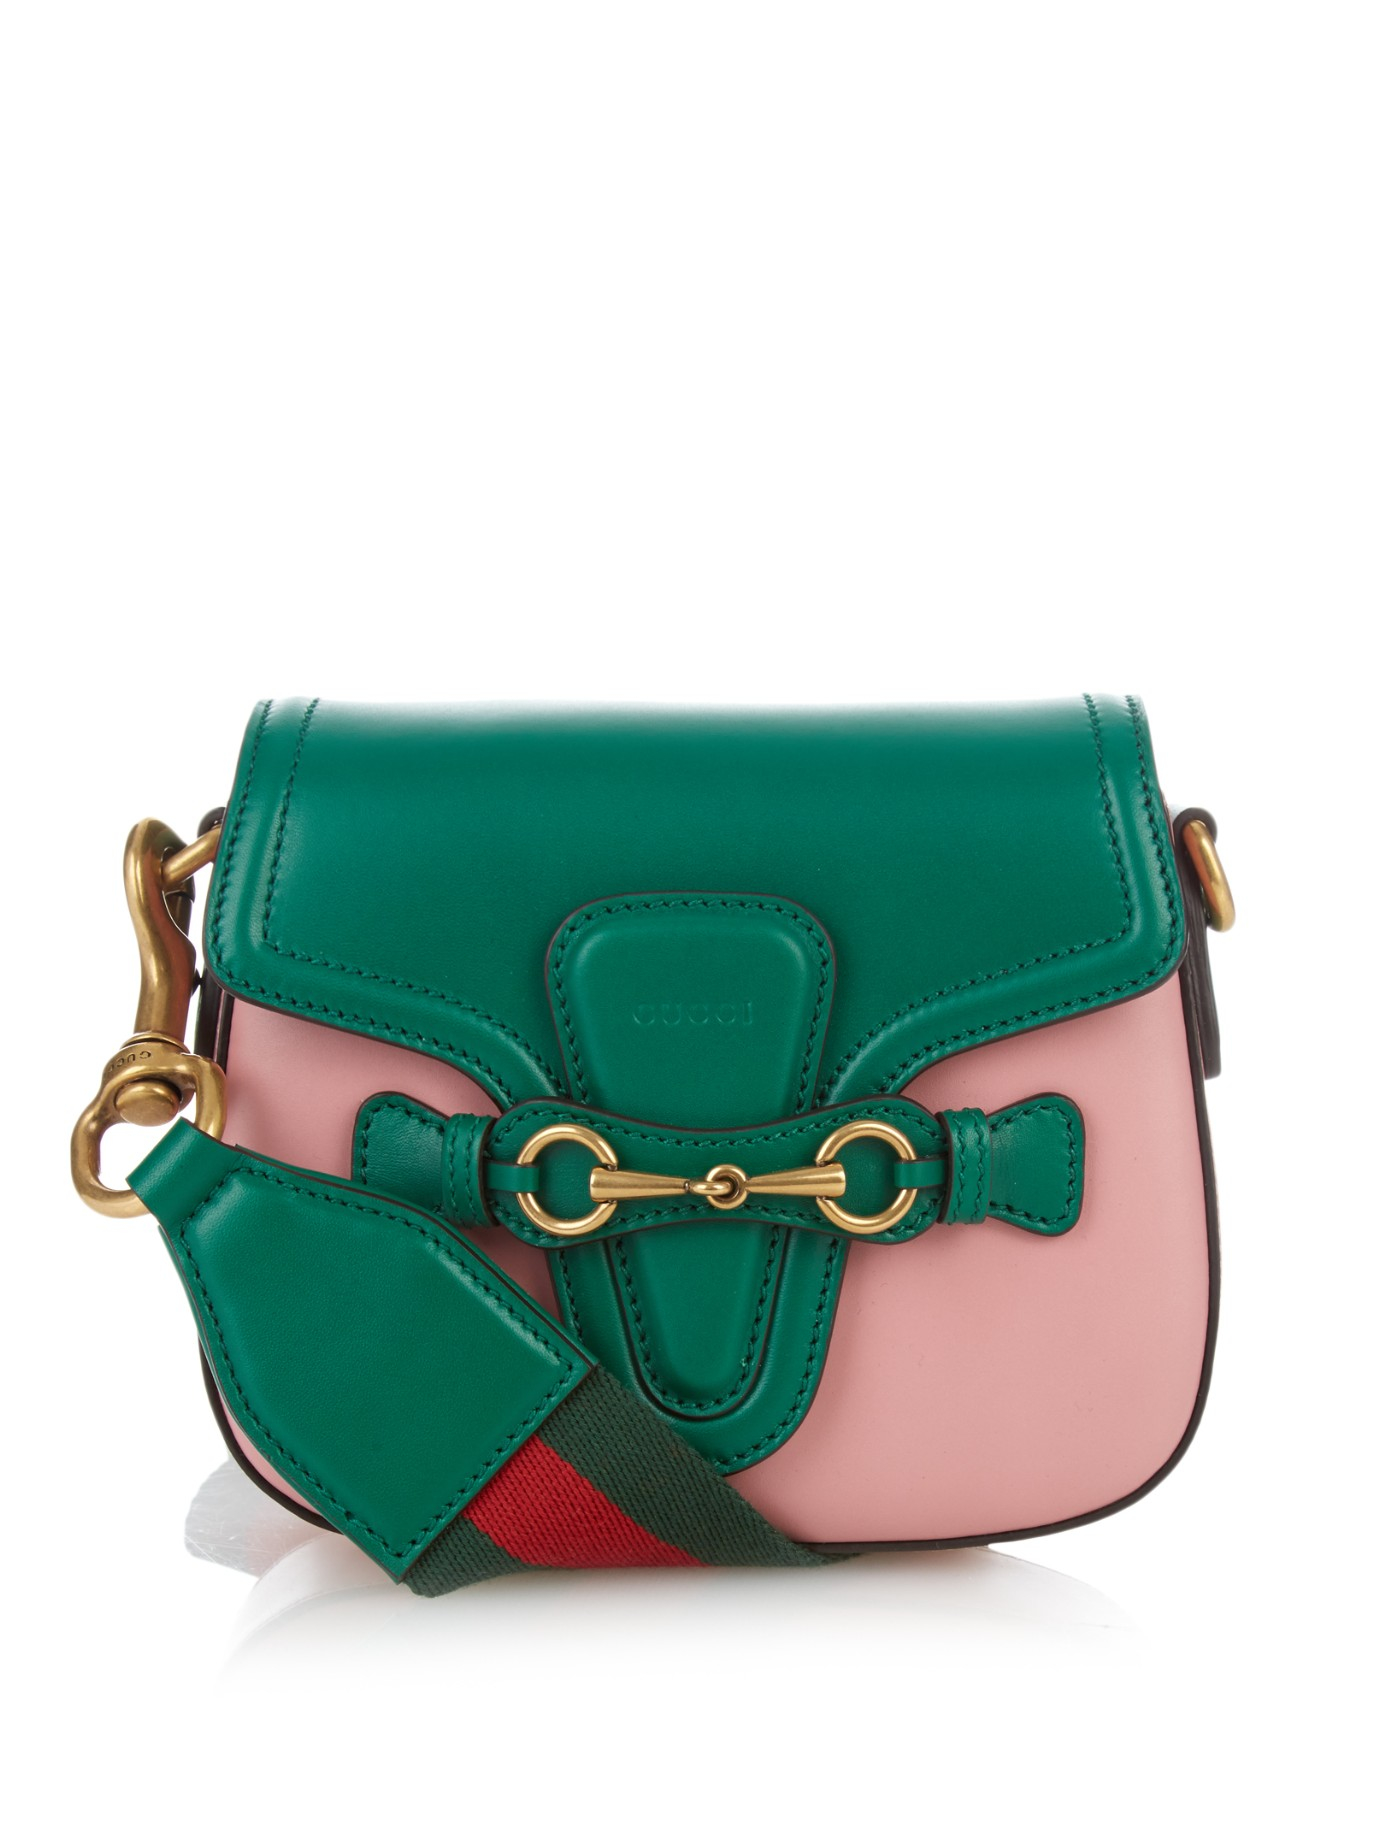 Gucci Lady Web Mini Leather Cross-body Bag in Pink - Lyst